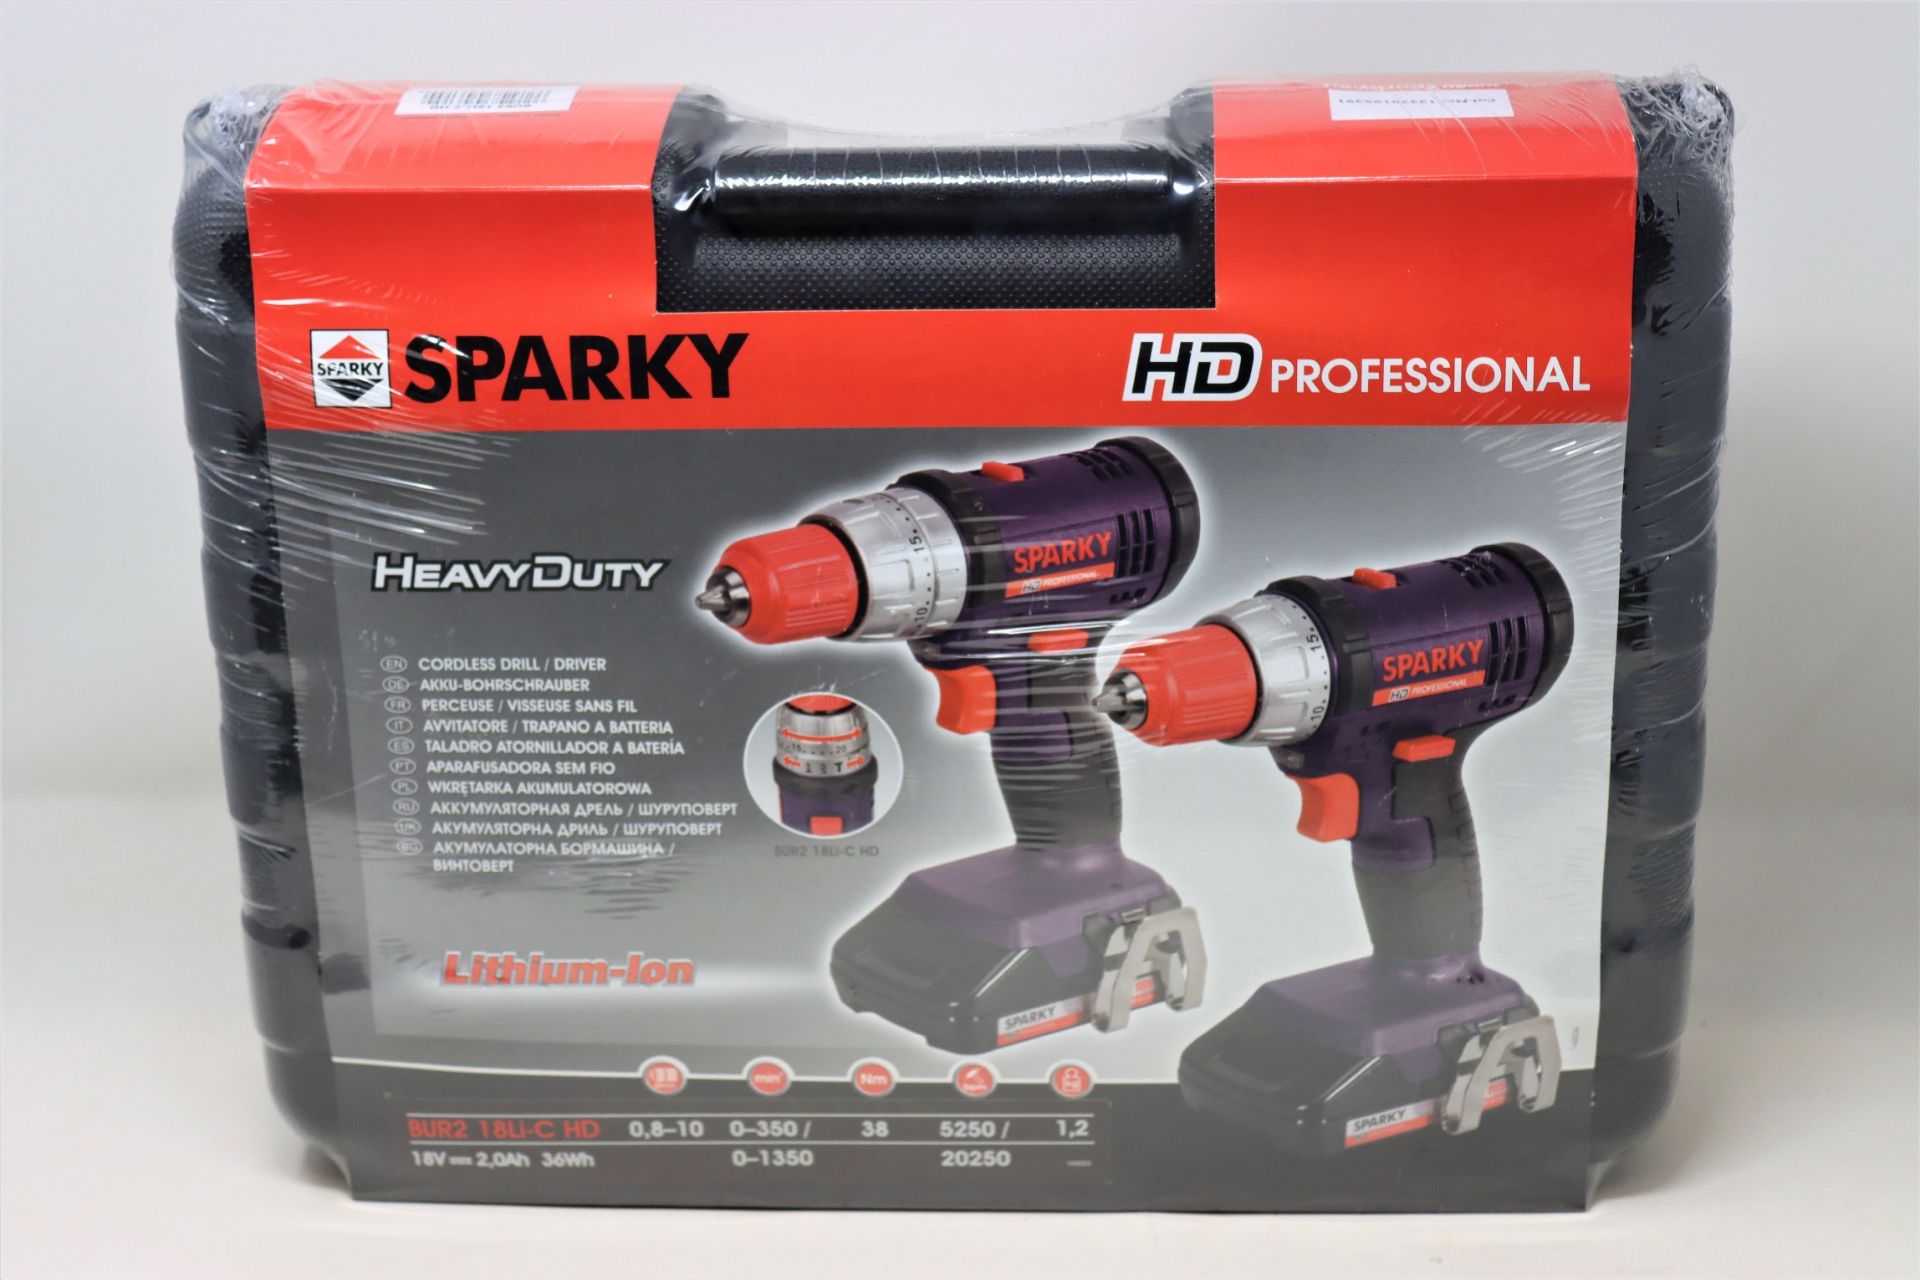 An as new Sparky HD Professional Heavy Duty Cordless Drill/Driver.